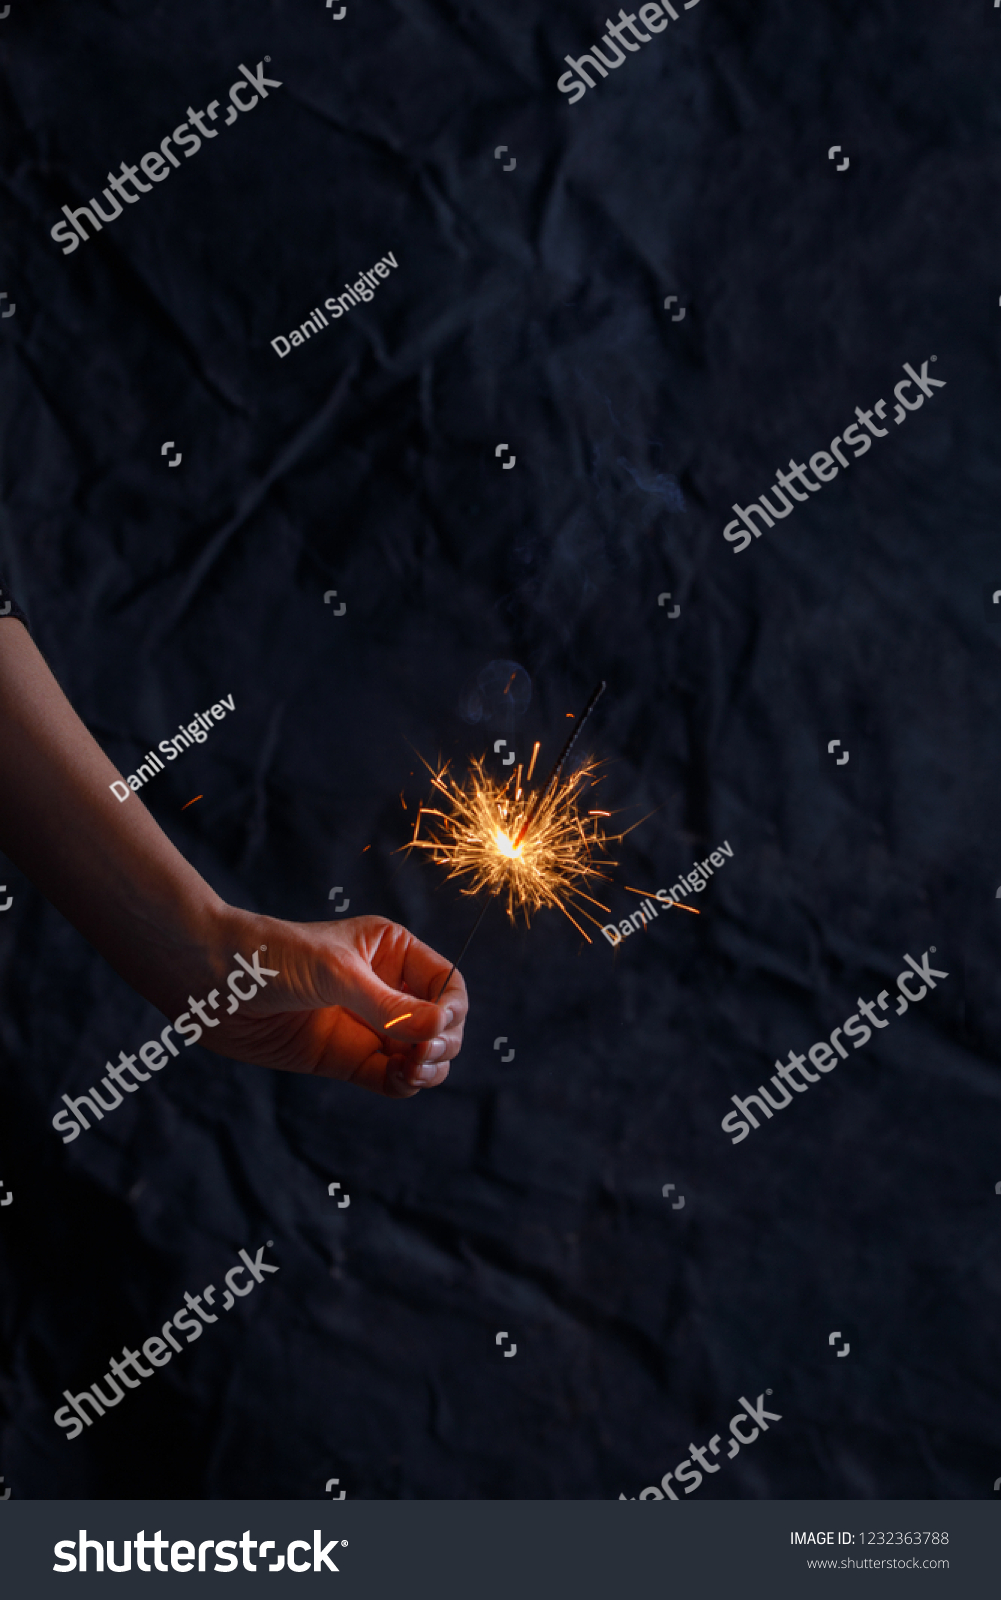 Female hand holding a burning sparkler. Christmas sparkler holiday background for xmas new year. Abstract Sparklers for celebration. #1232363788